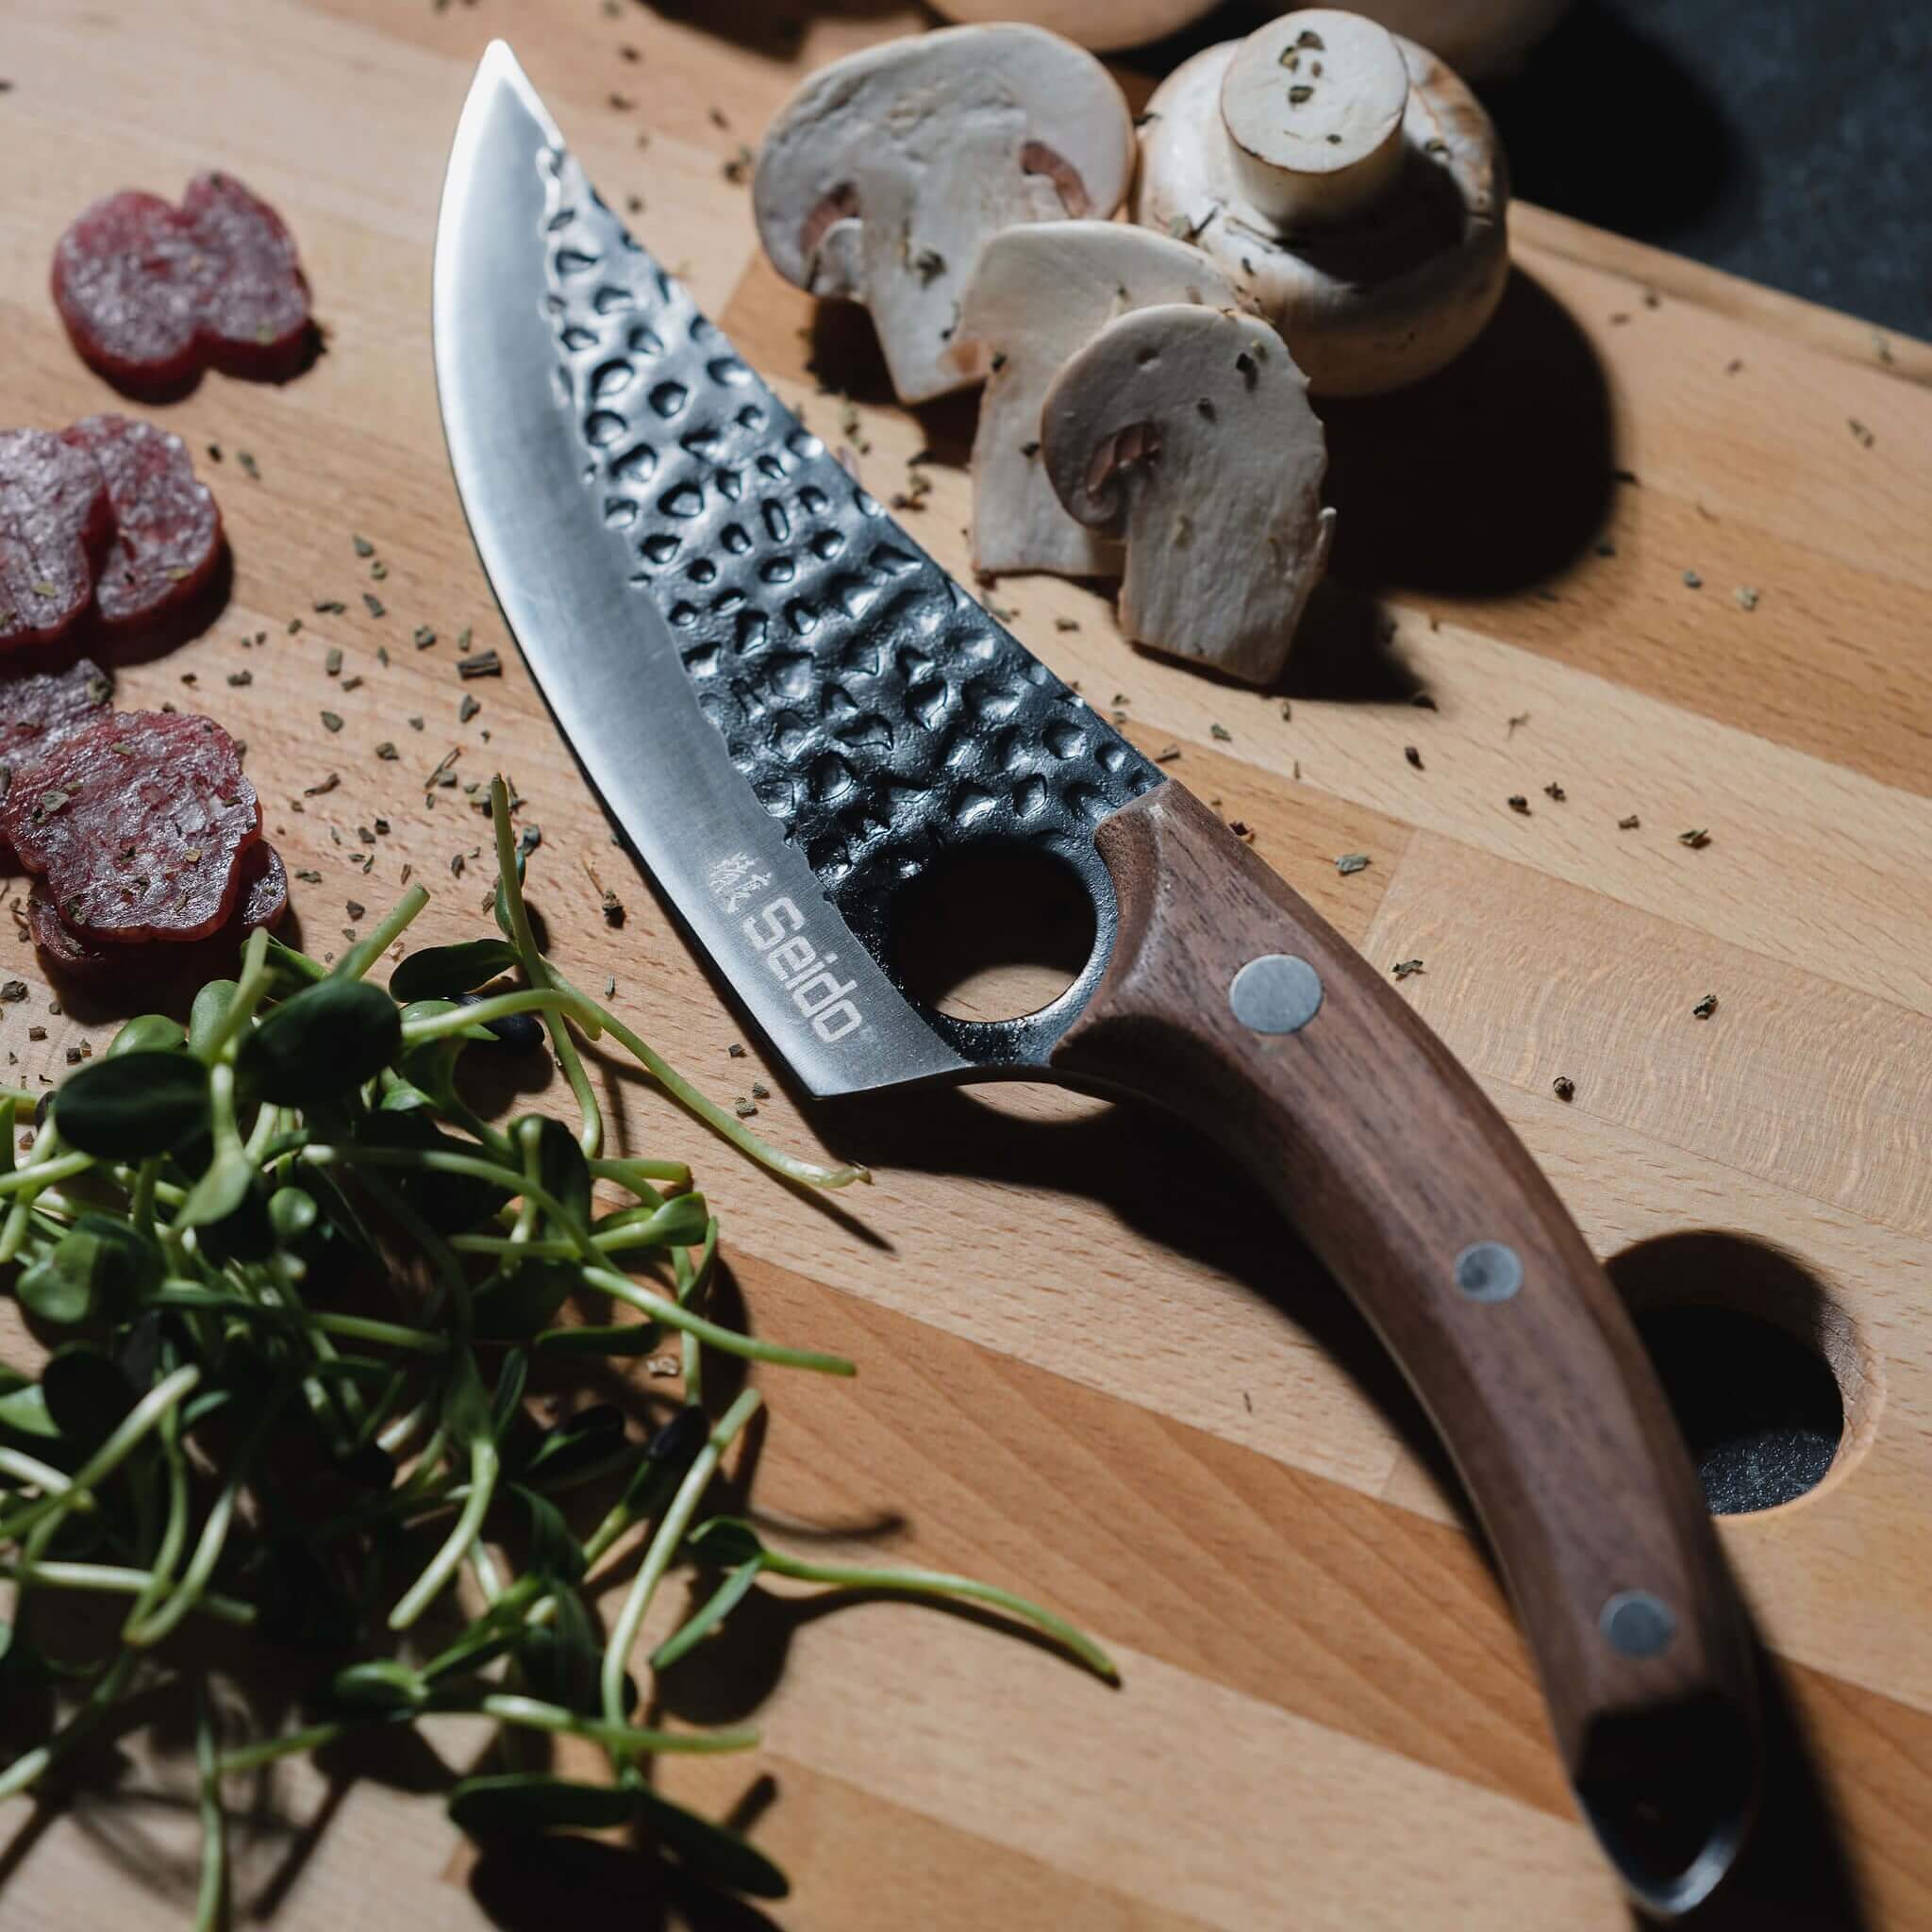 A Kyodai Utility Chef Knife and fresh mushrooms on a cutting board, ready for a delicious culinary adventure!